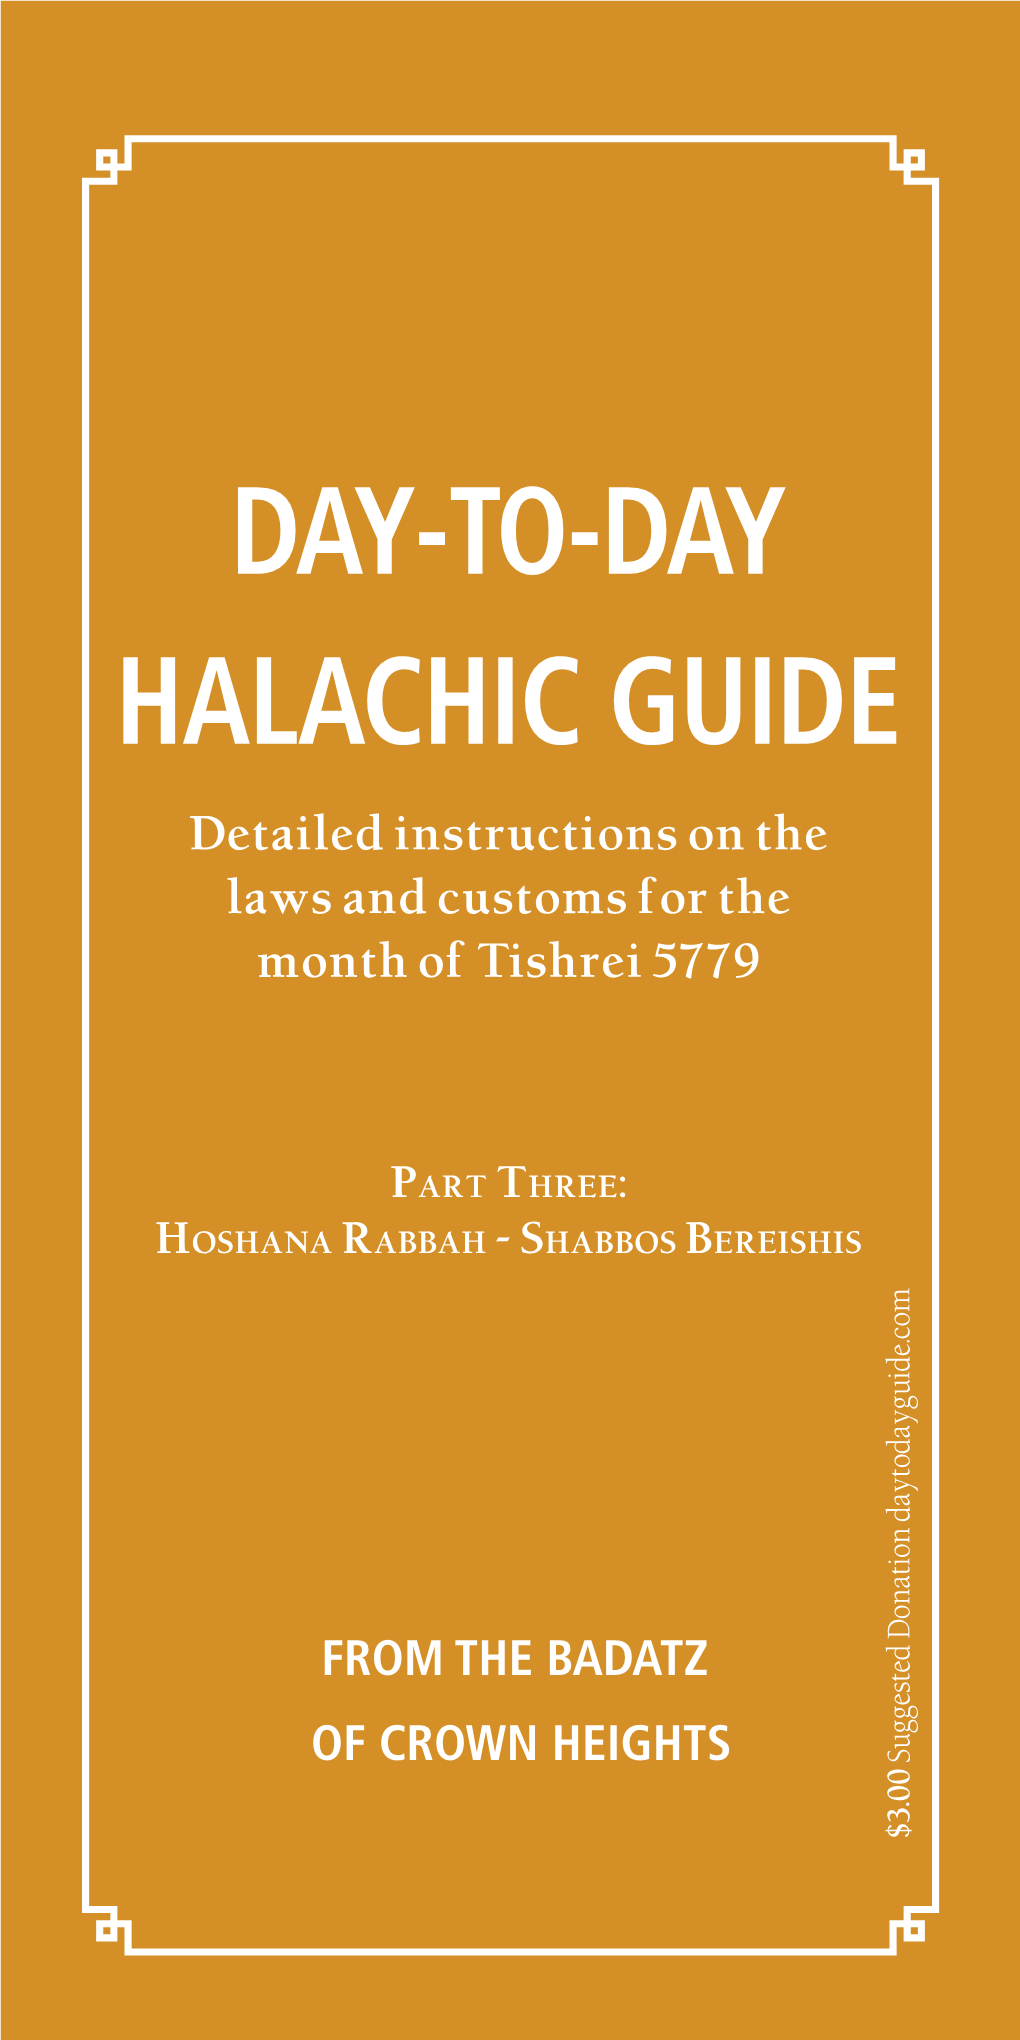 DAY-TO-DAY HALACHIC GUIDE Detailed Instructions on the Laws and Customs for the Month of Tishrei 5779